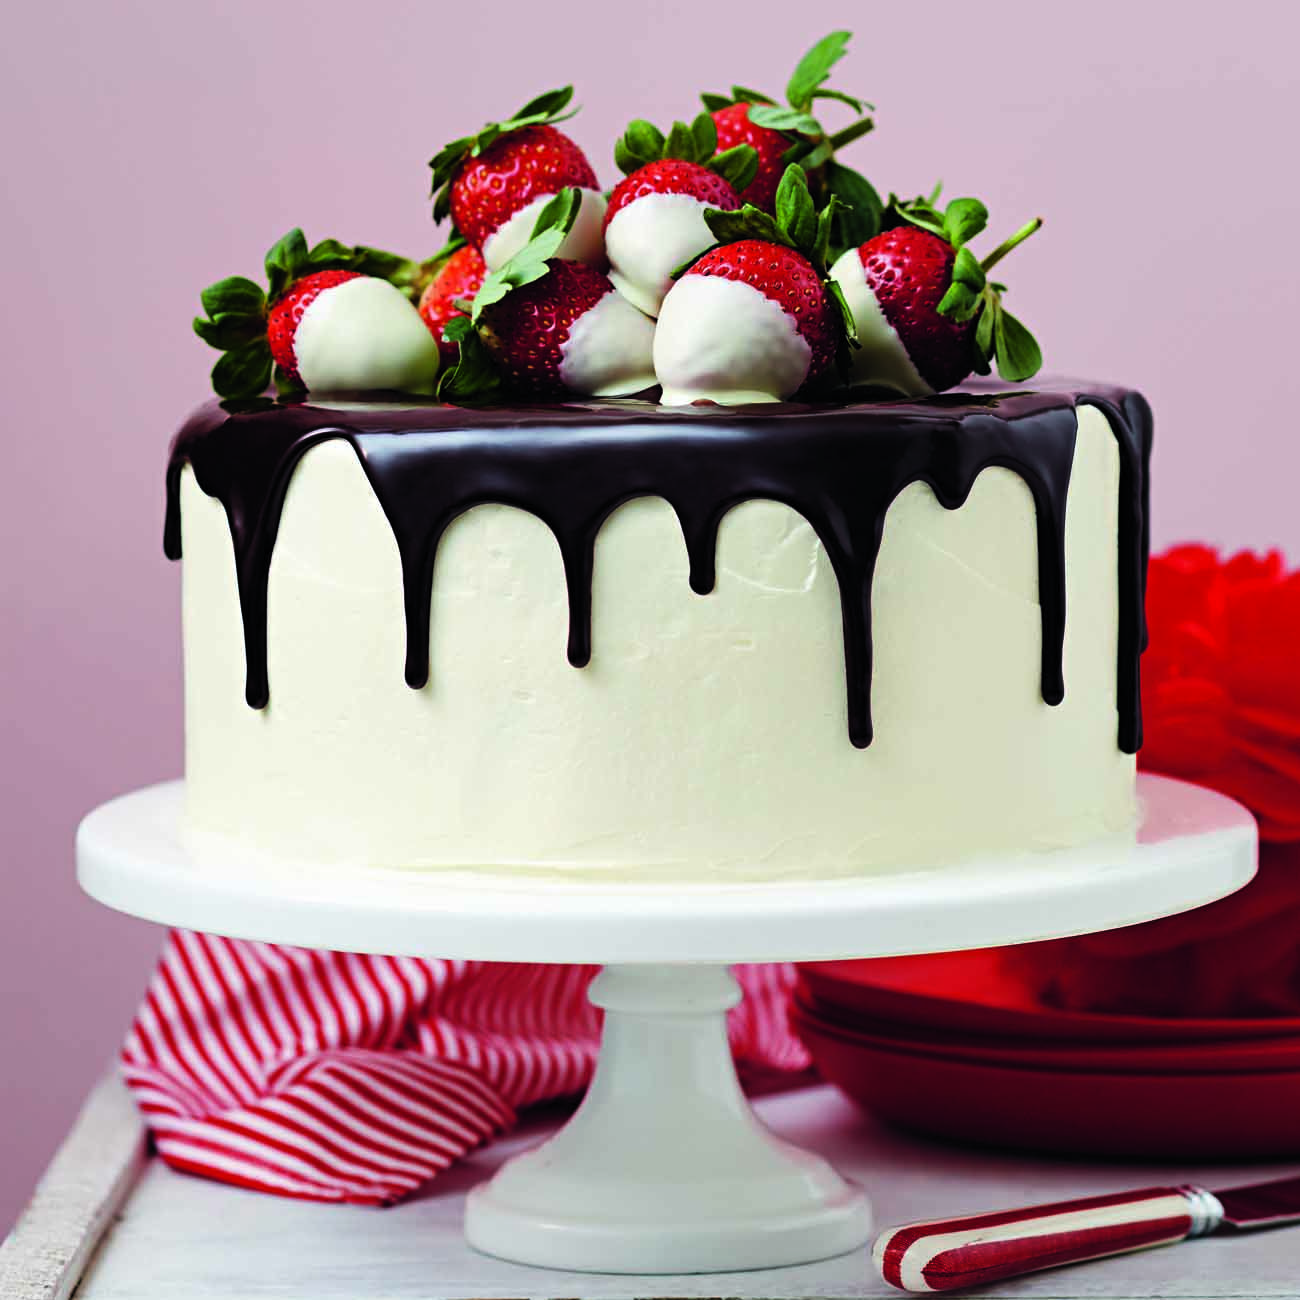 Deliver online cakes to your dear one's doorstep